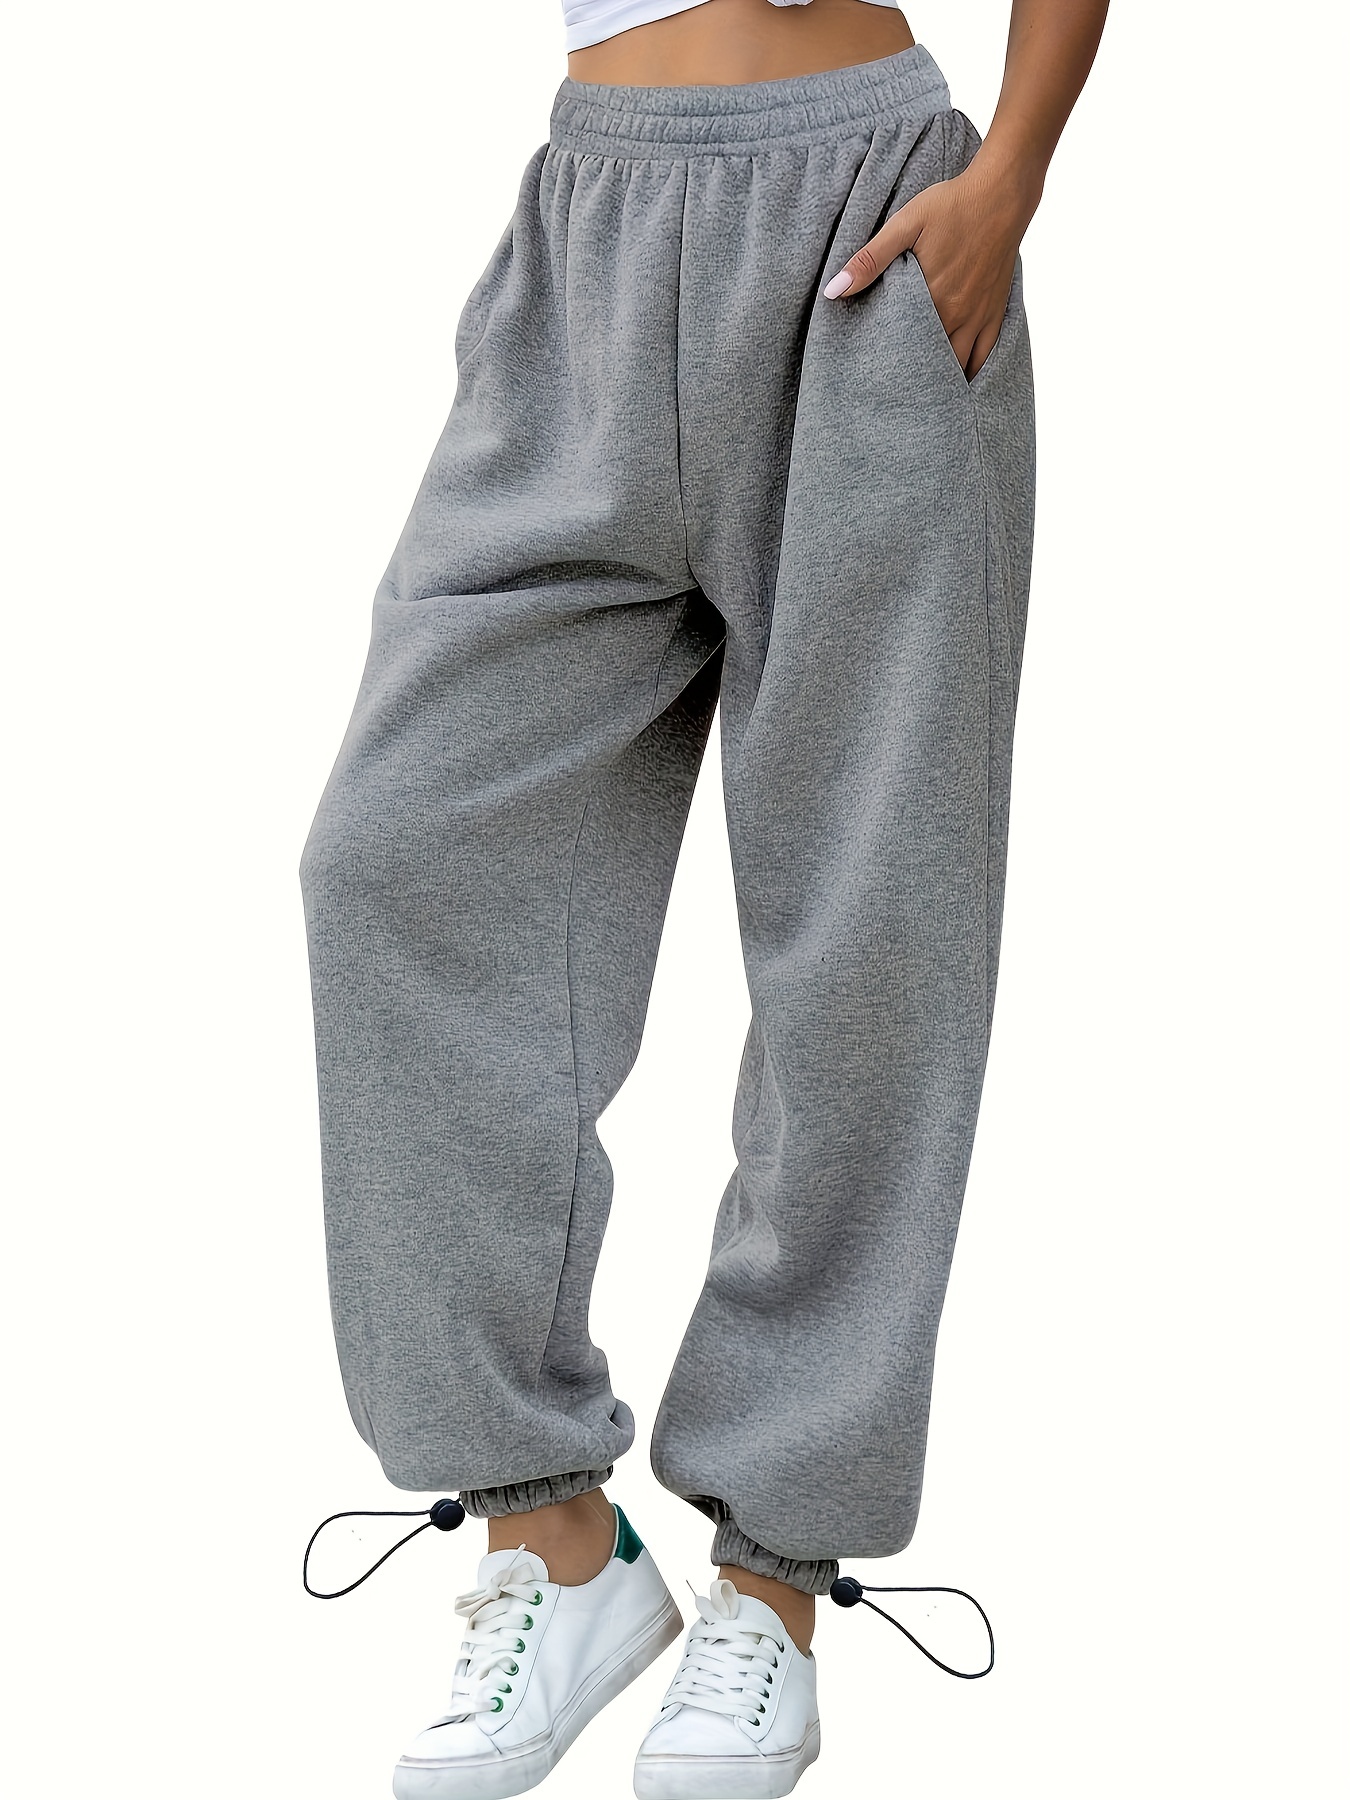 How To Hem Sweatpants Without Elastic? – solowomen